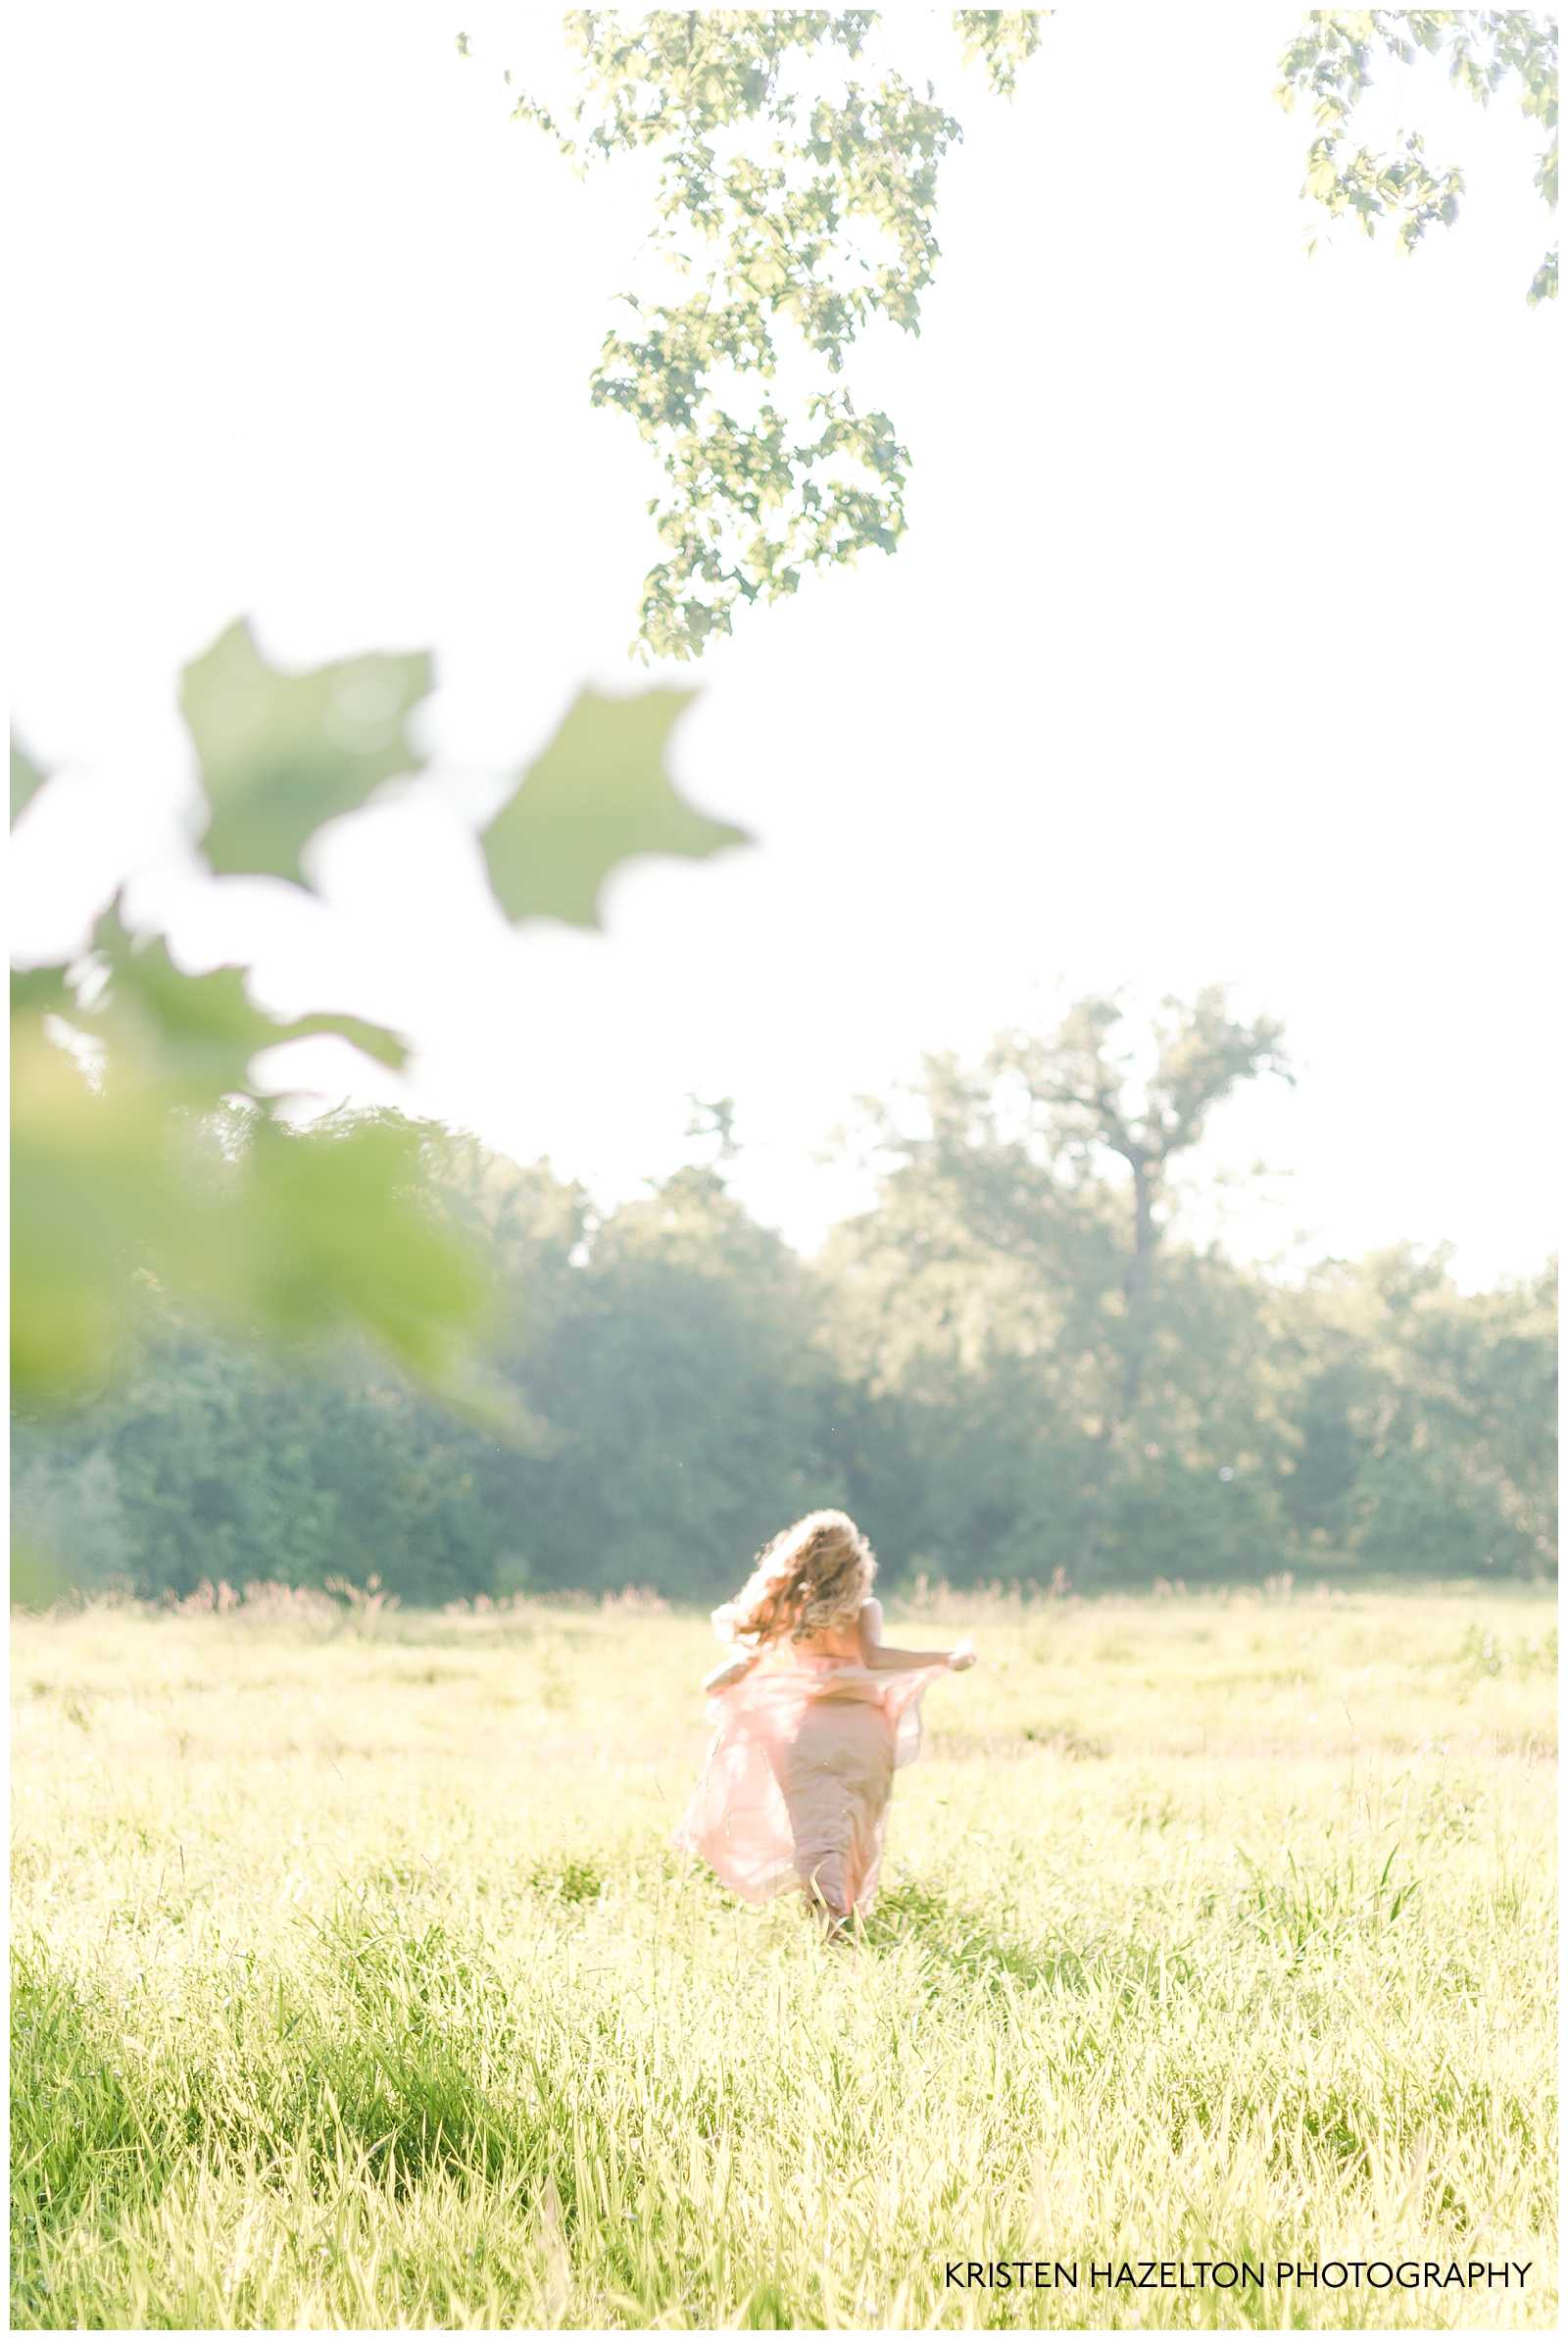 Out of focus photo of a redheaded woman running in a meadow